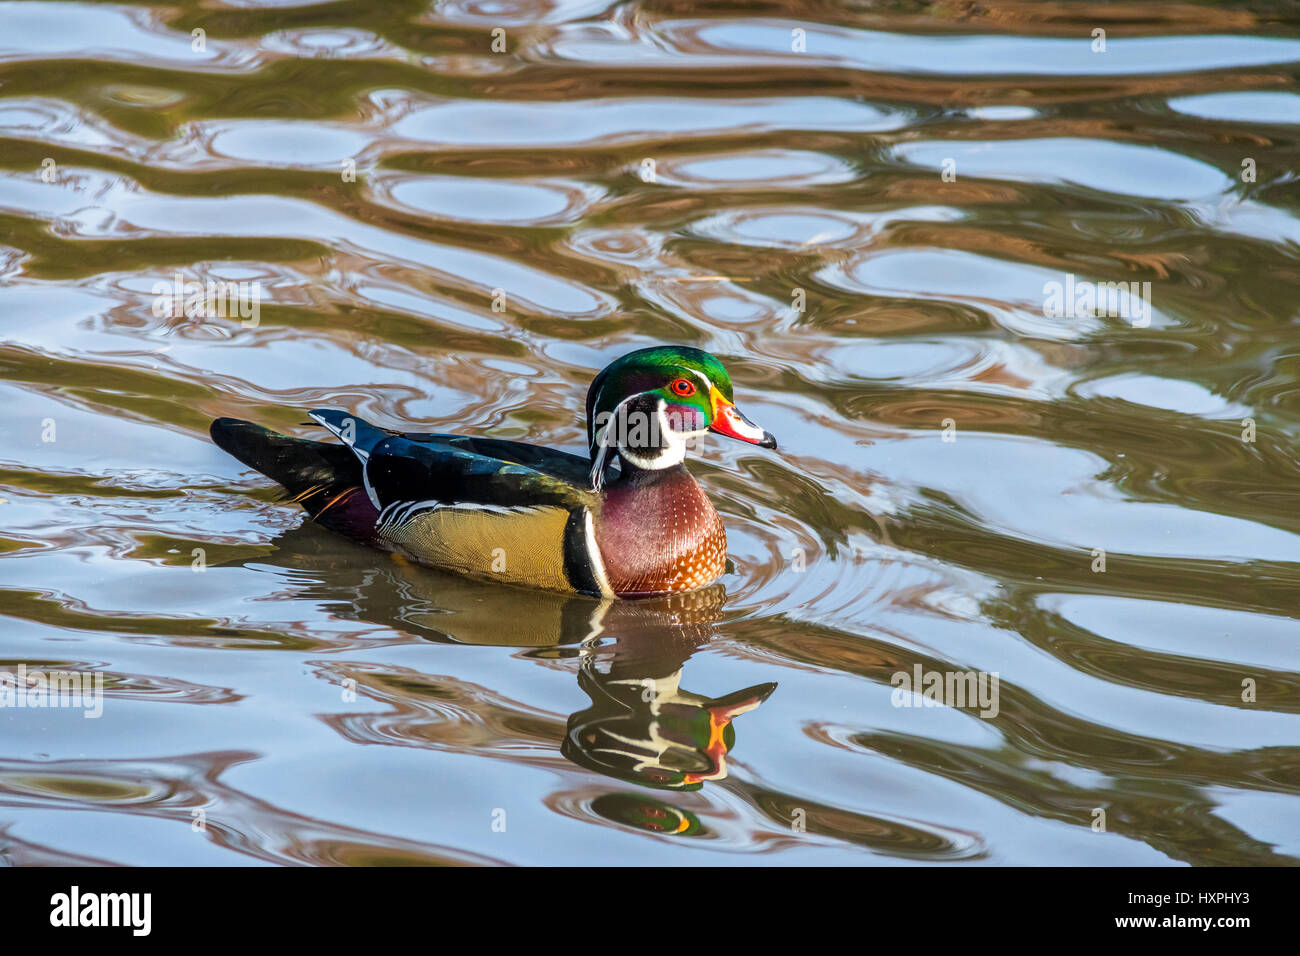 Male wood duck swimming in a pond of High Park - Toronto, Ontario, Canada Stock Photo